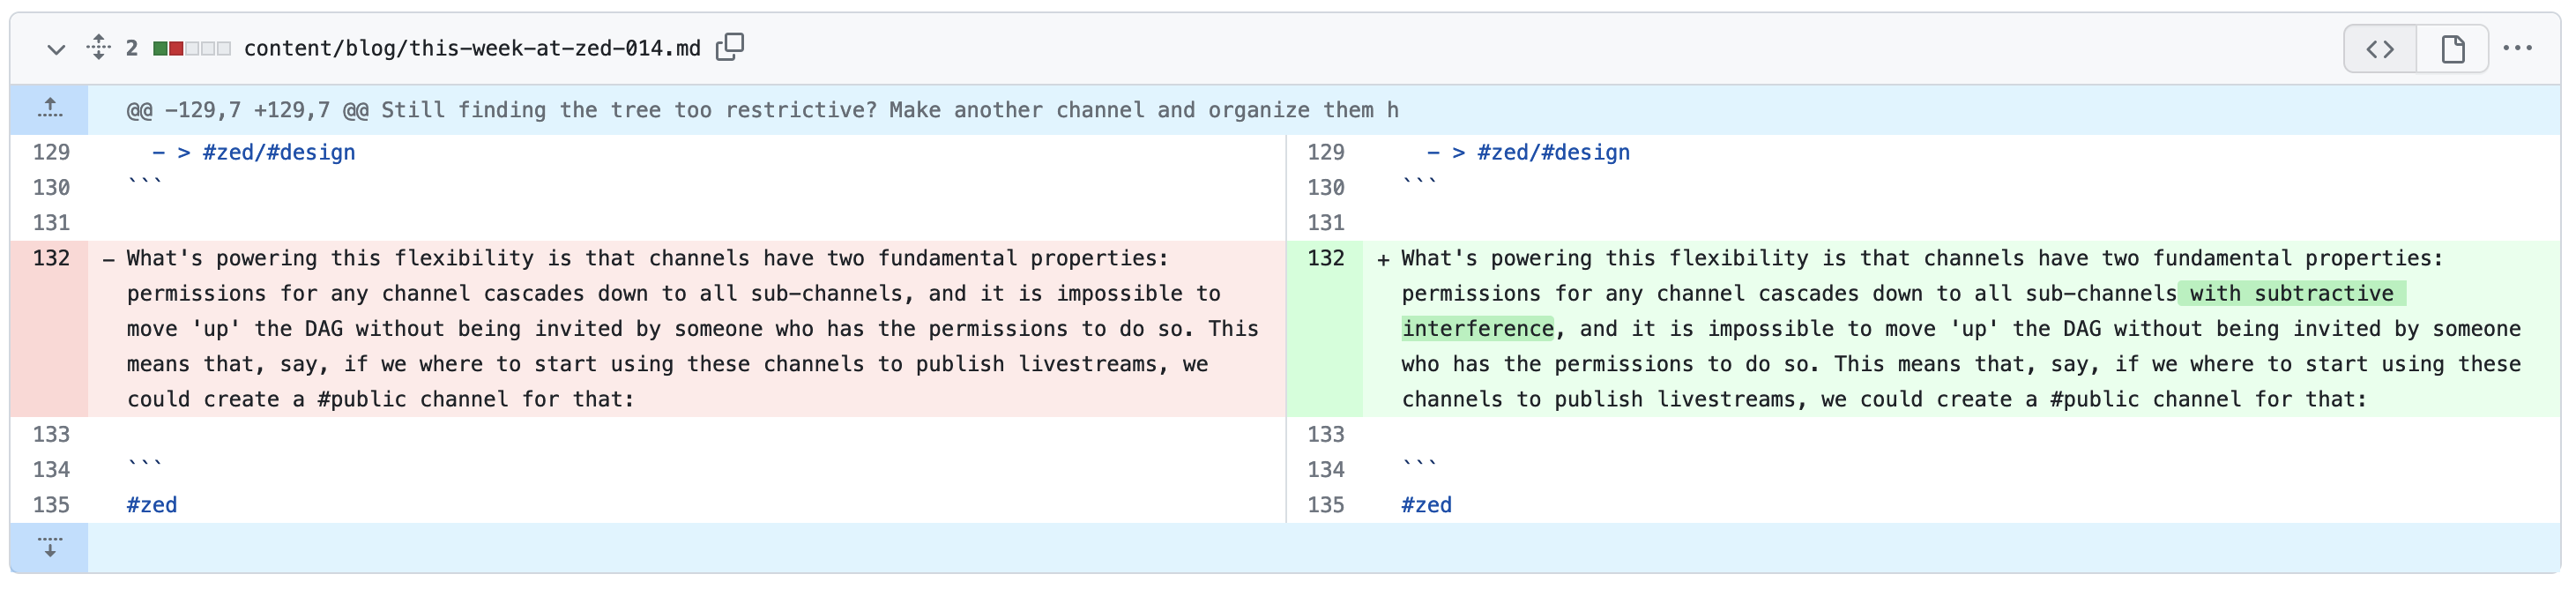 An image of a GitHub commit diff, showing the addition